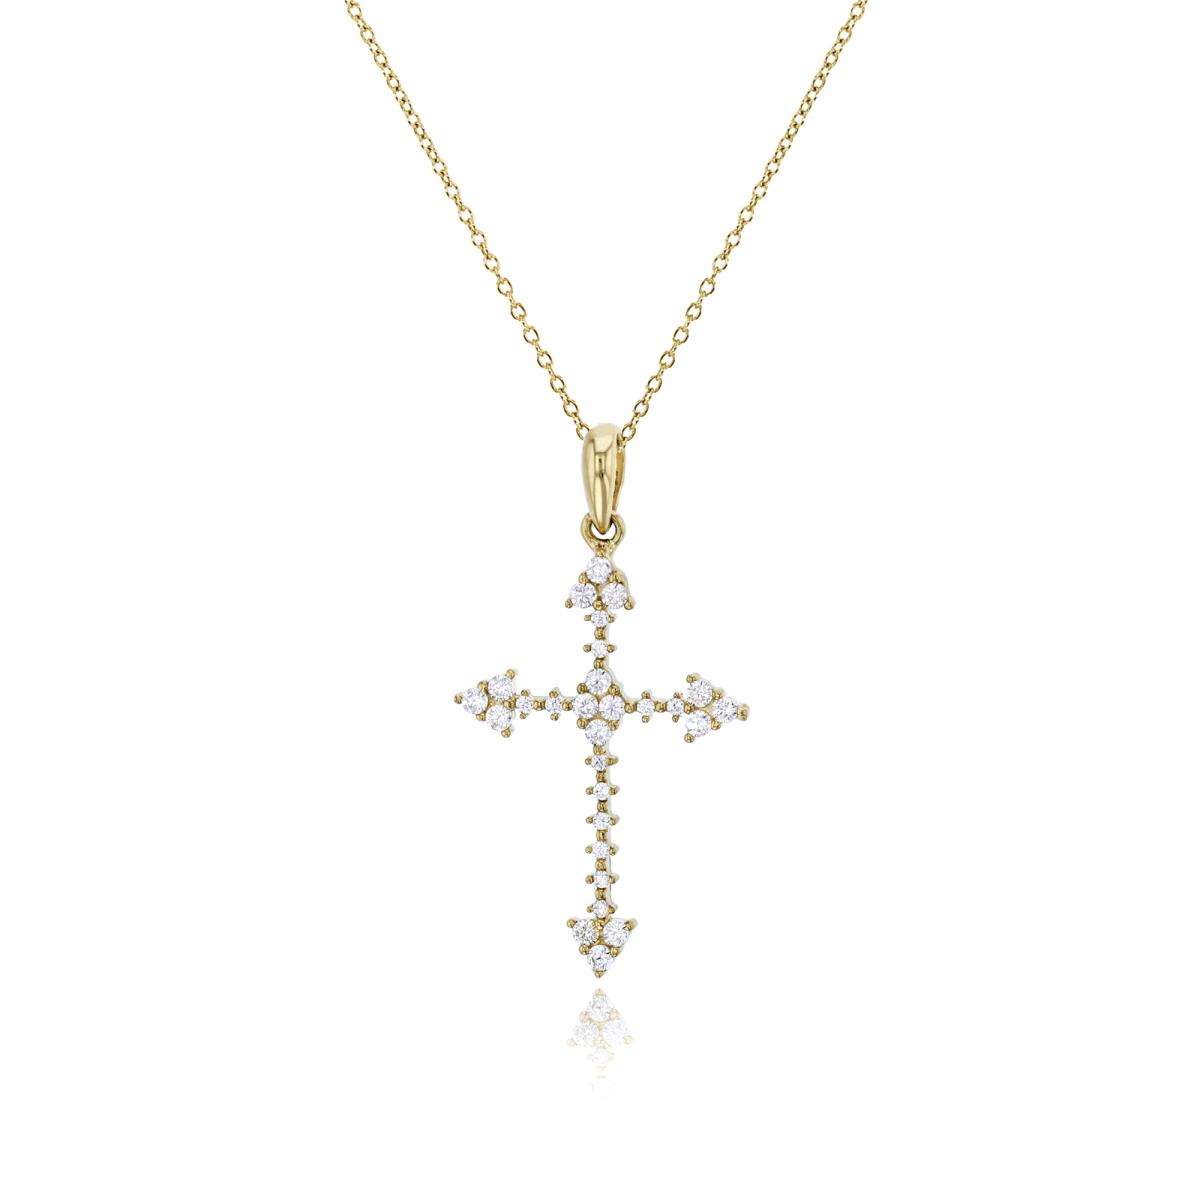 14K Yellow Gold 31x16mm Micropave Cross Dangling 18" Necklace